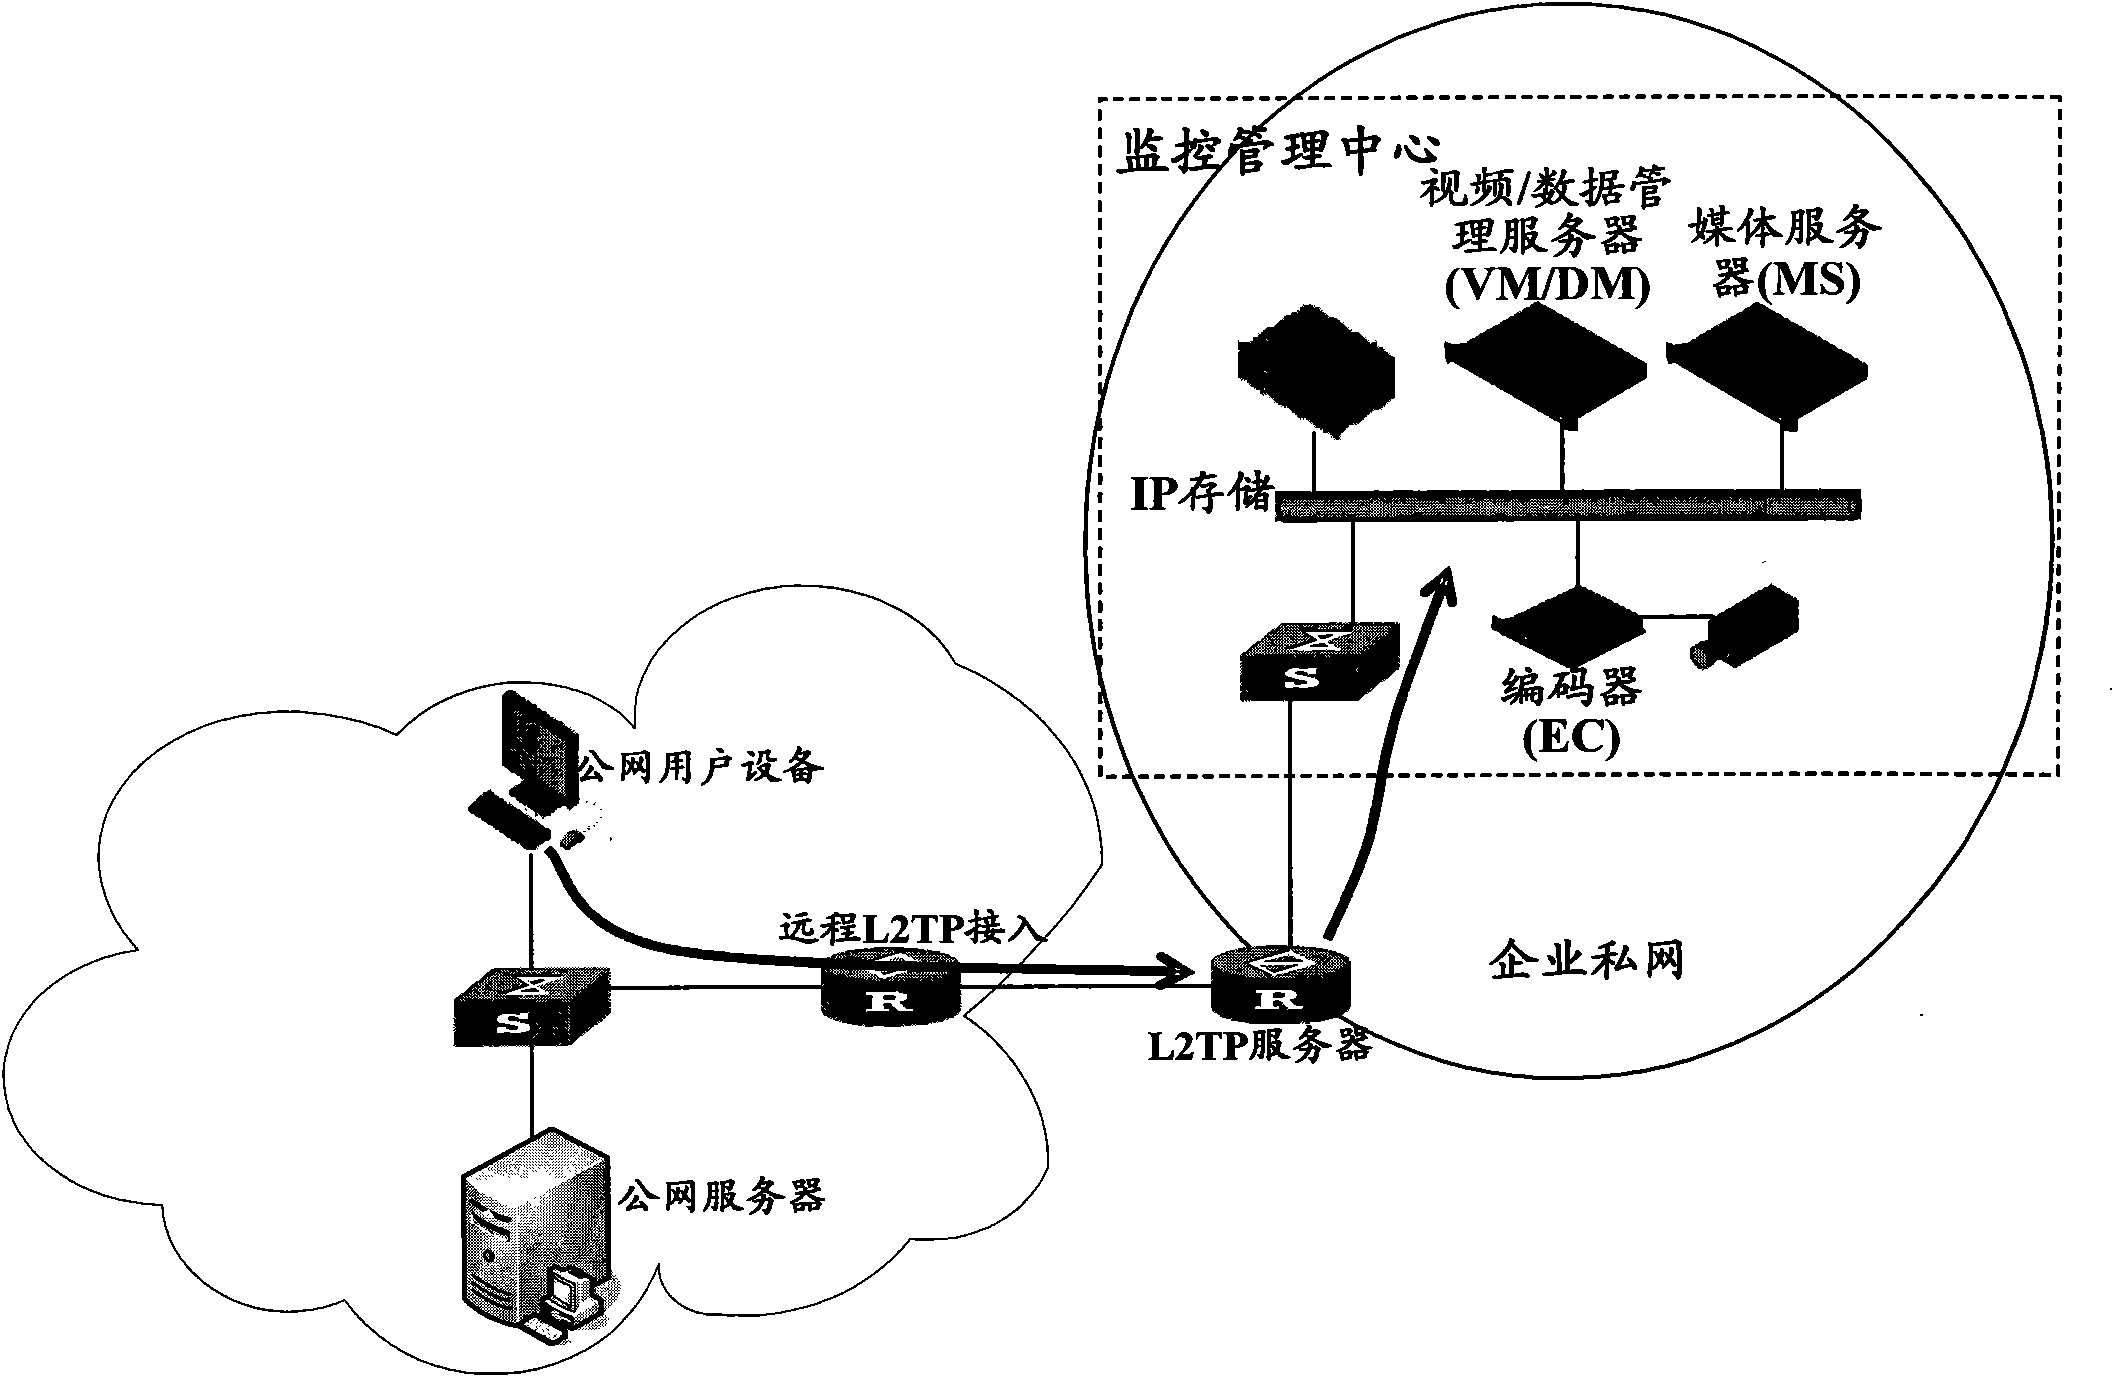 Method for accessing and monitoring private network through layer 2 tunnel protocol and server